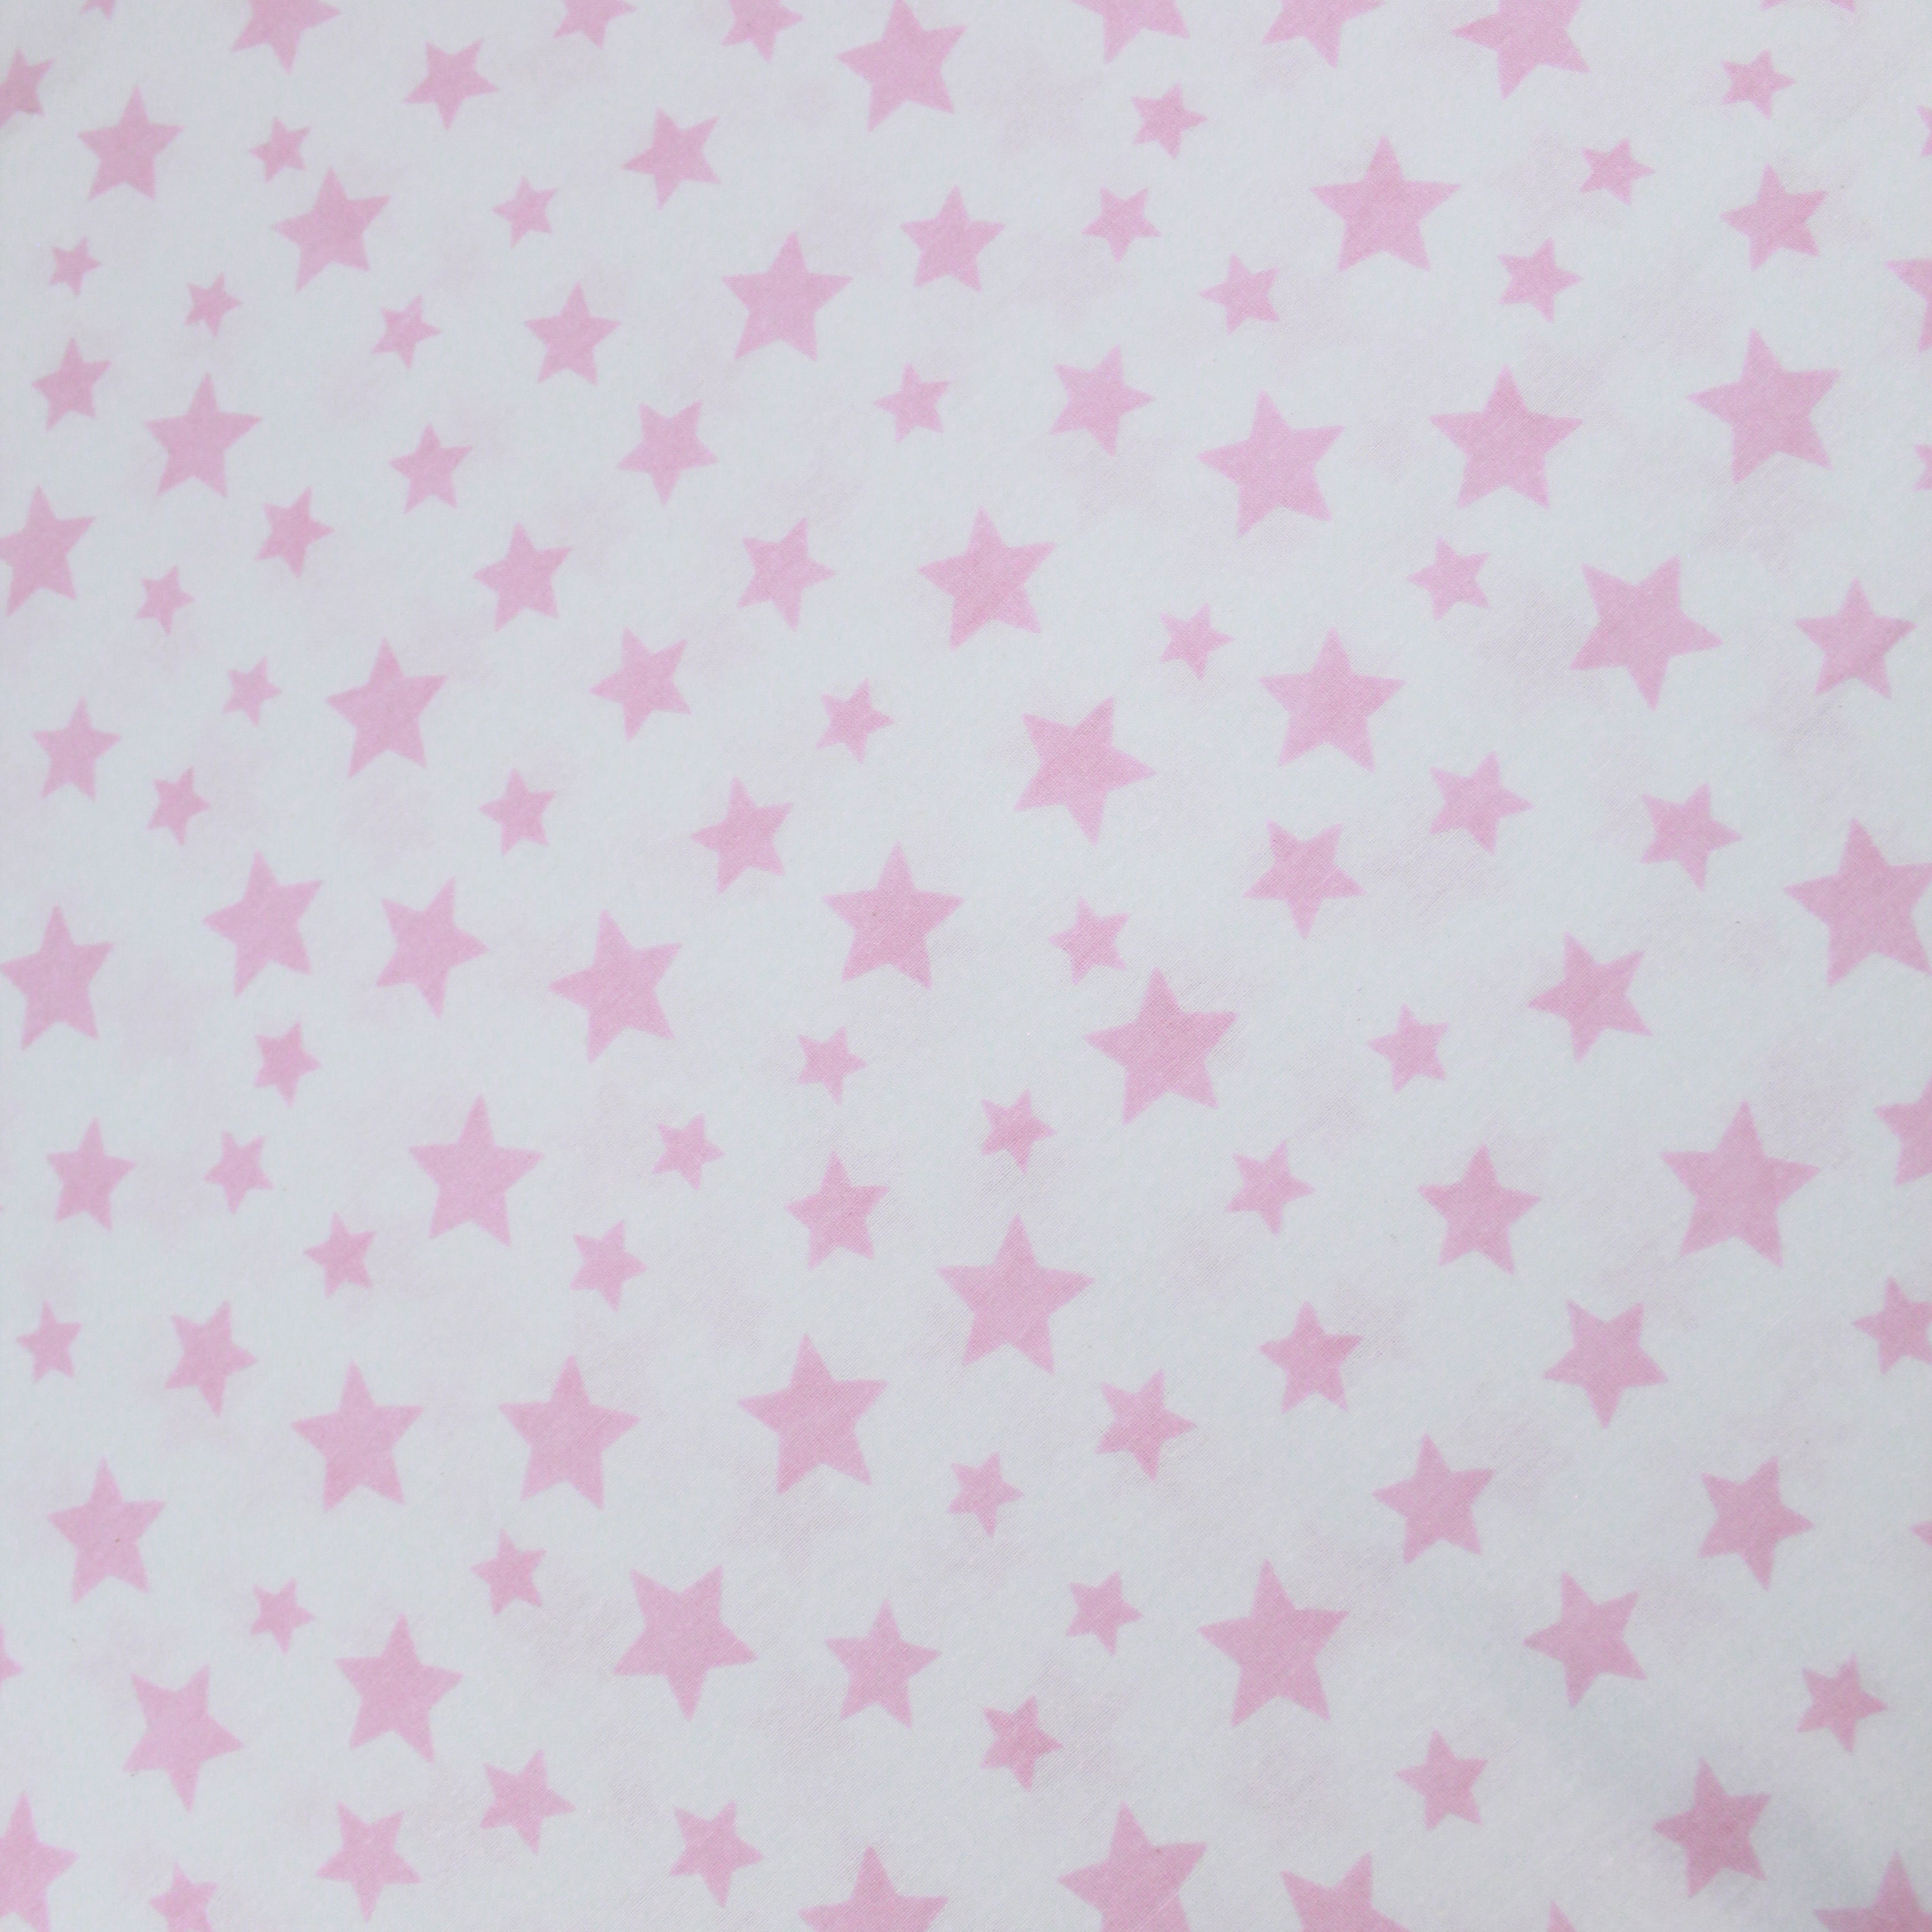 Premium Quality Super Wide Cotton Blend Sheeting "Pink Stars" 94" Wide White